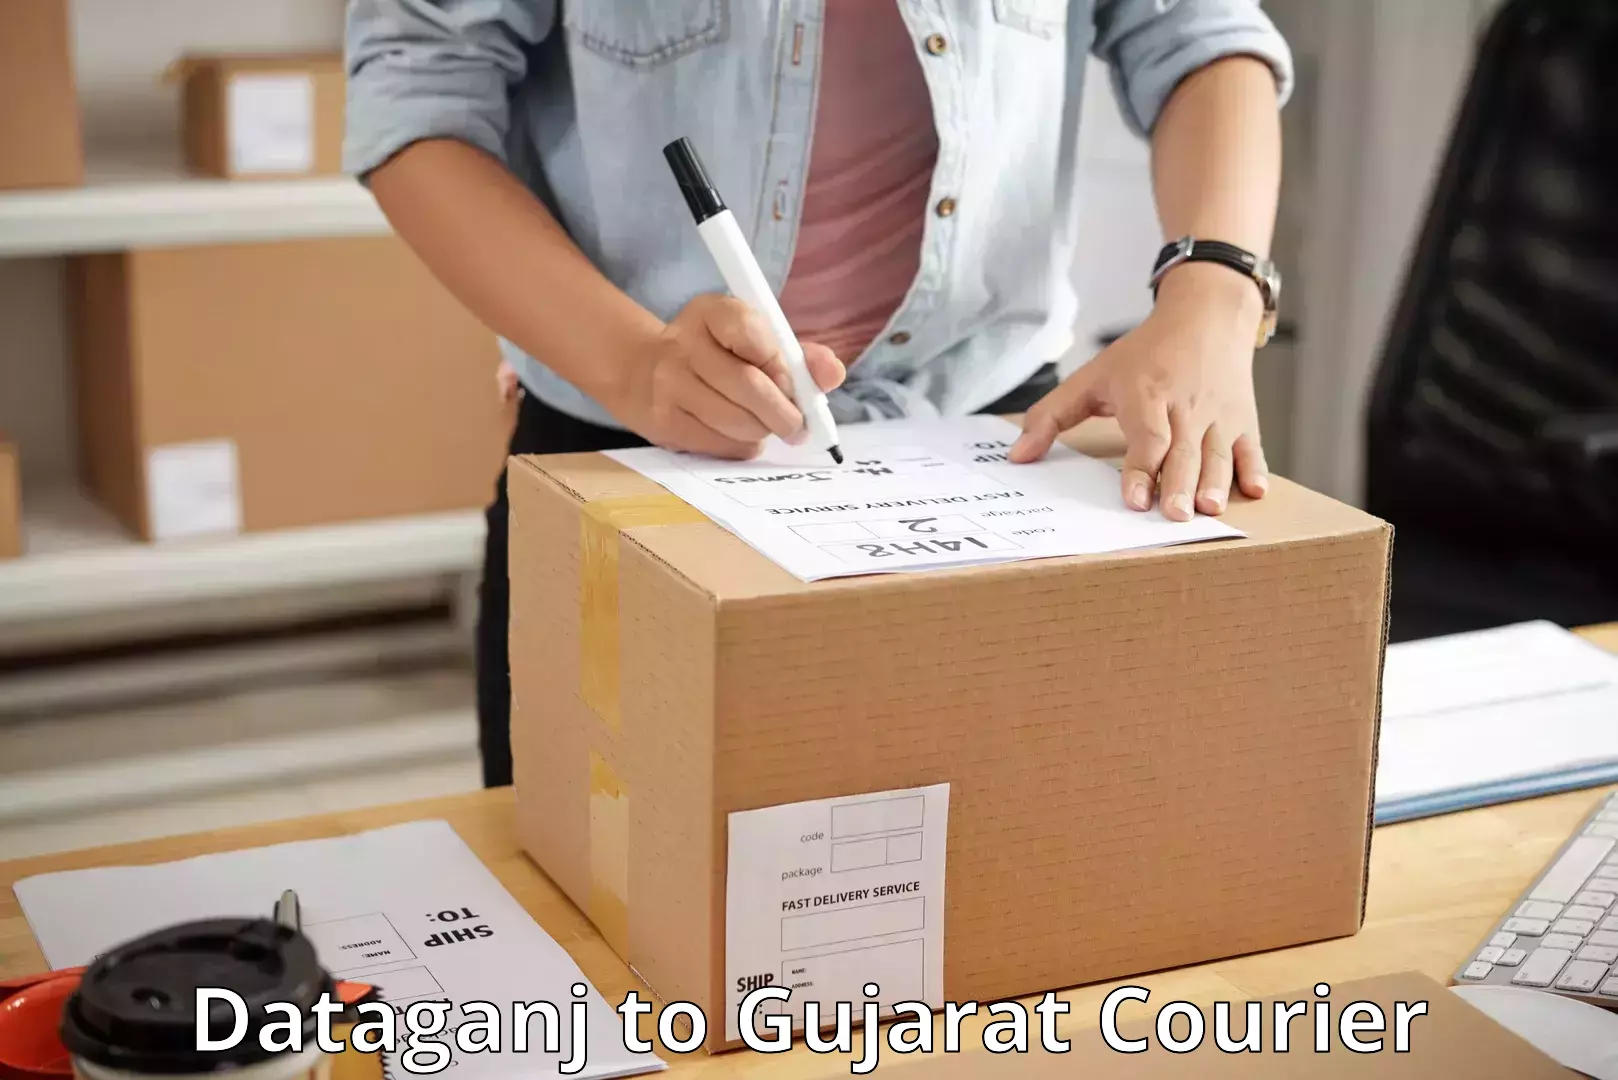 State-of-the-art courier technology in Dataganj to Dayapar